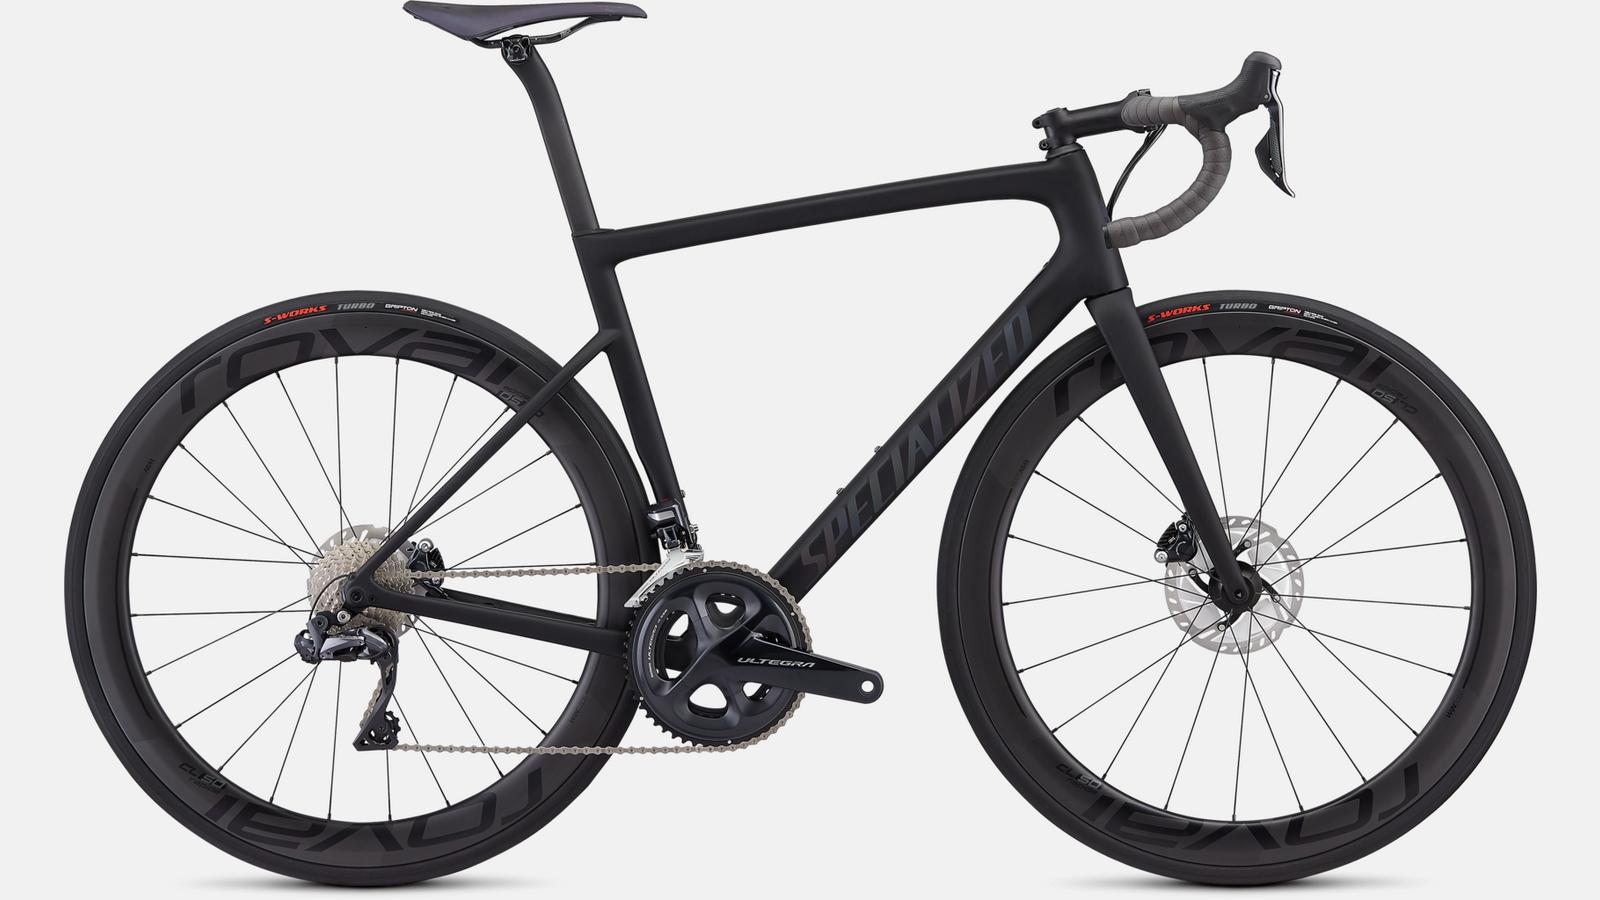 Touch-up paint for 2019 Specialized Men's Tarmac Disc Pro - Satin Black